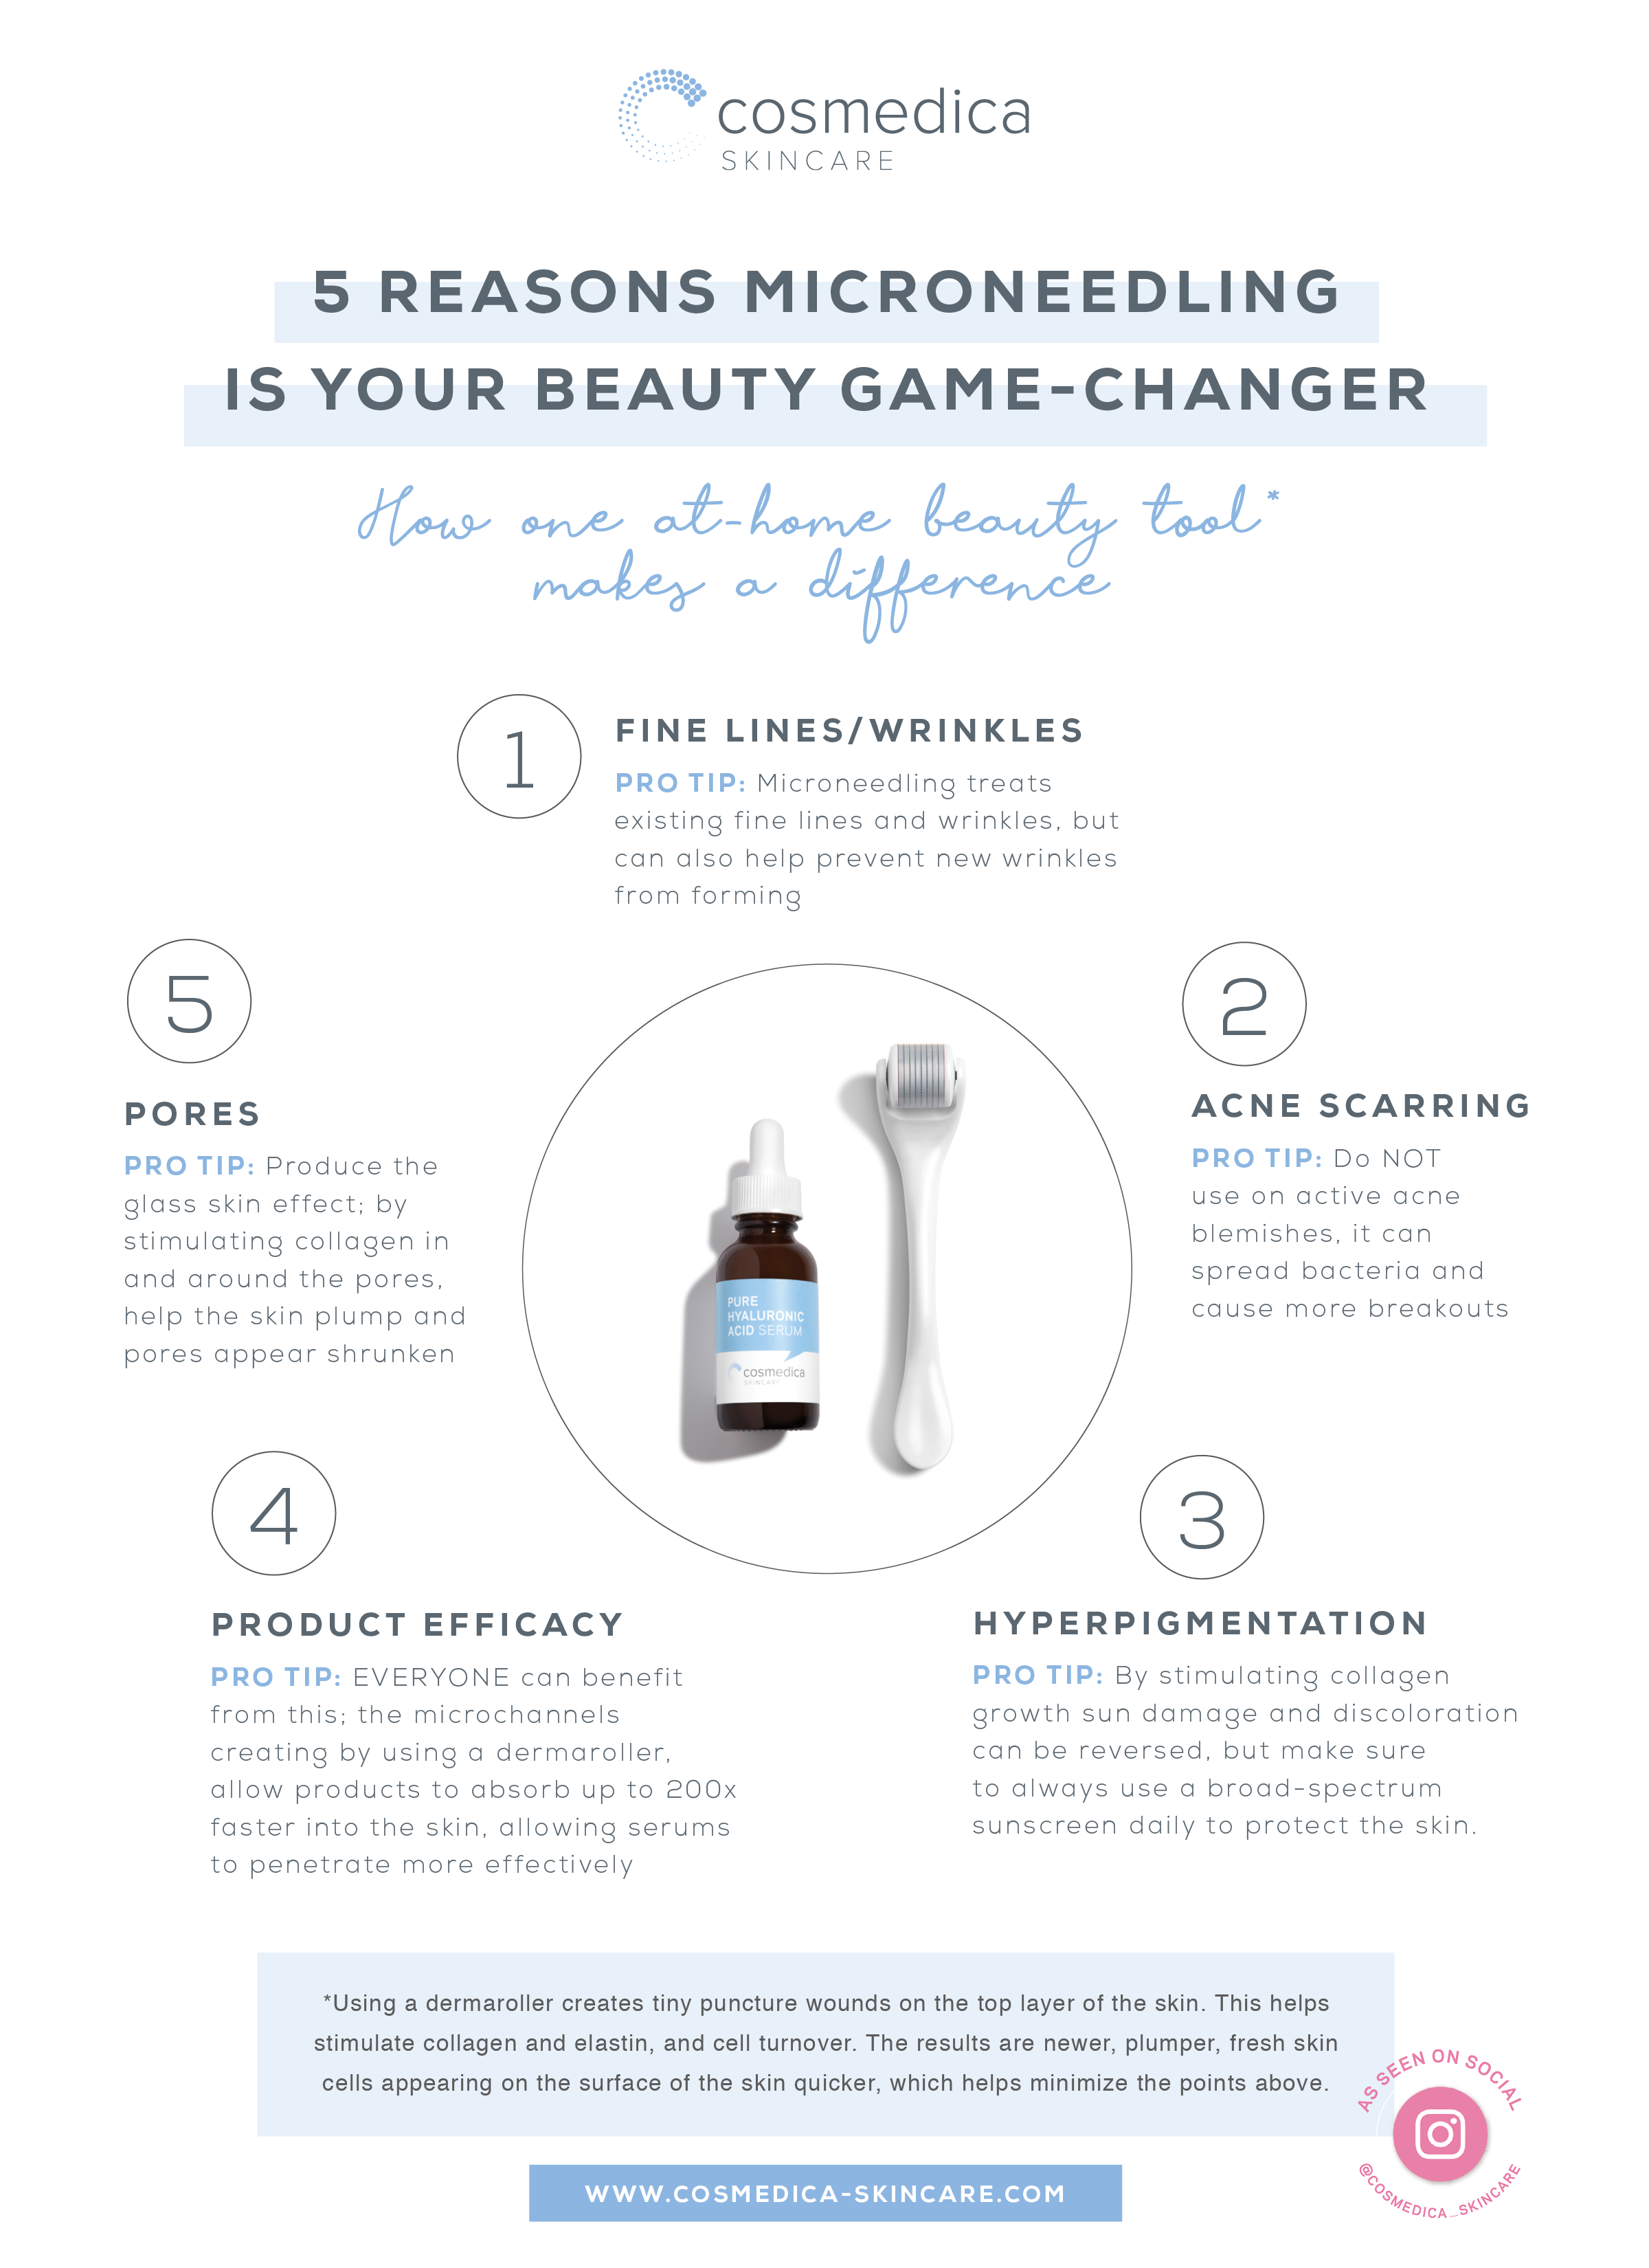 5 Reasons Microneedling is Your Beauty Game Changer